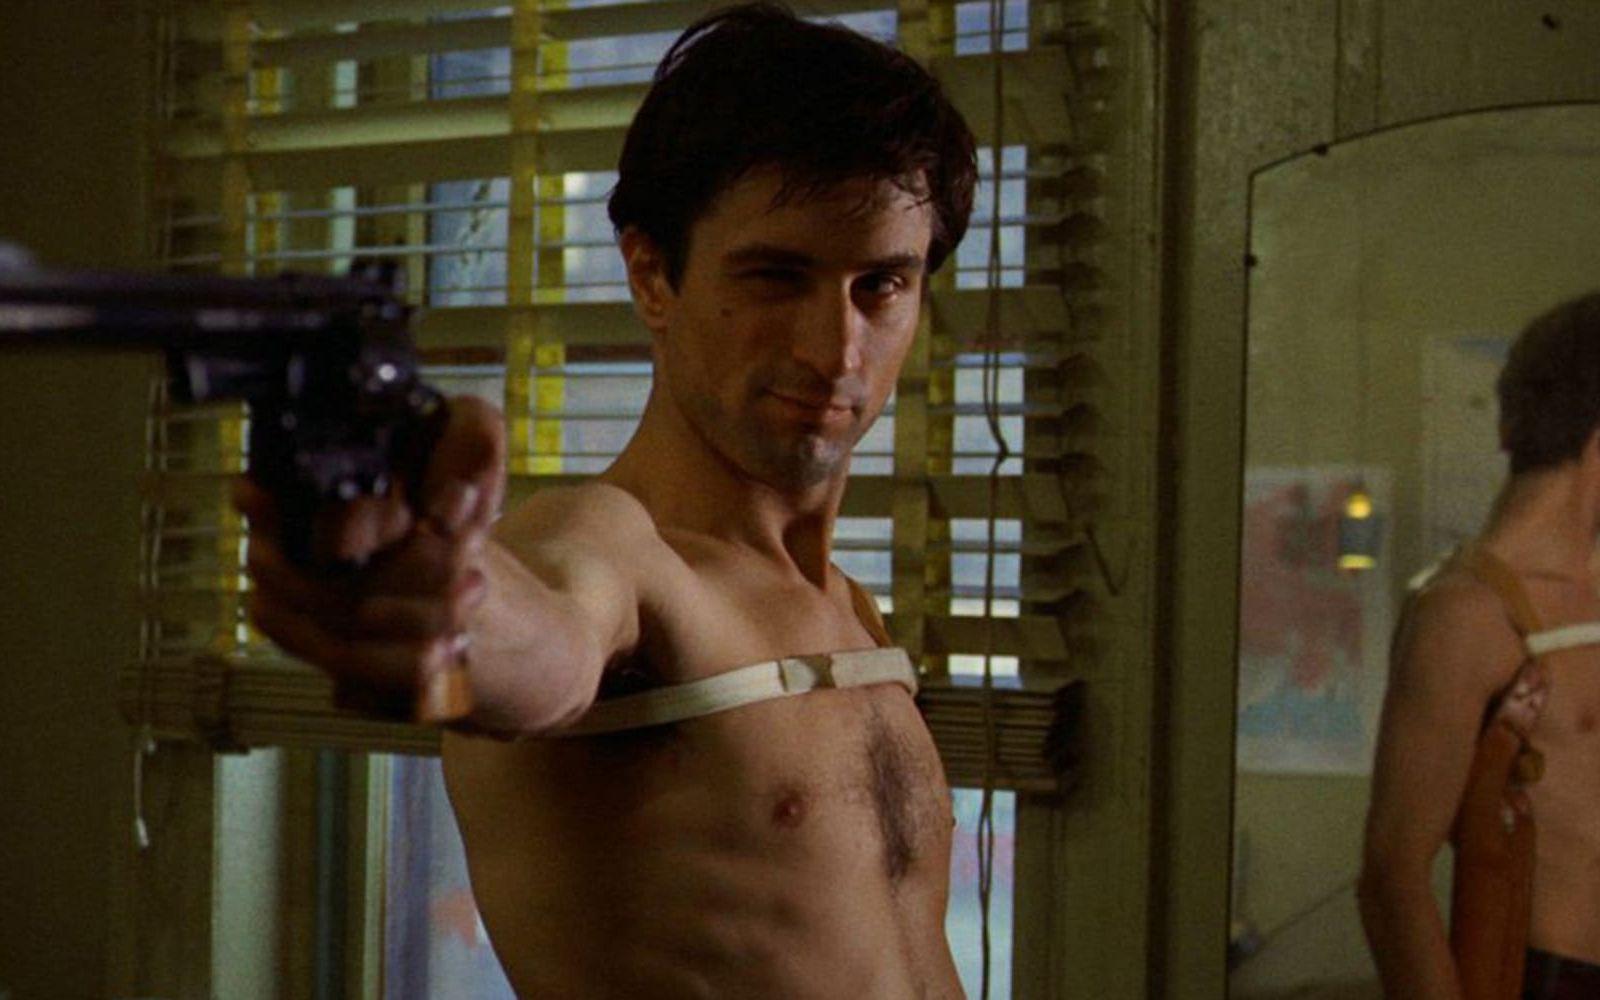 "You talkin' to me? Well I'm the only one here" – Robert De Niro som Travis Bickle i Taxi Driver, 1976